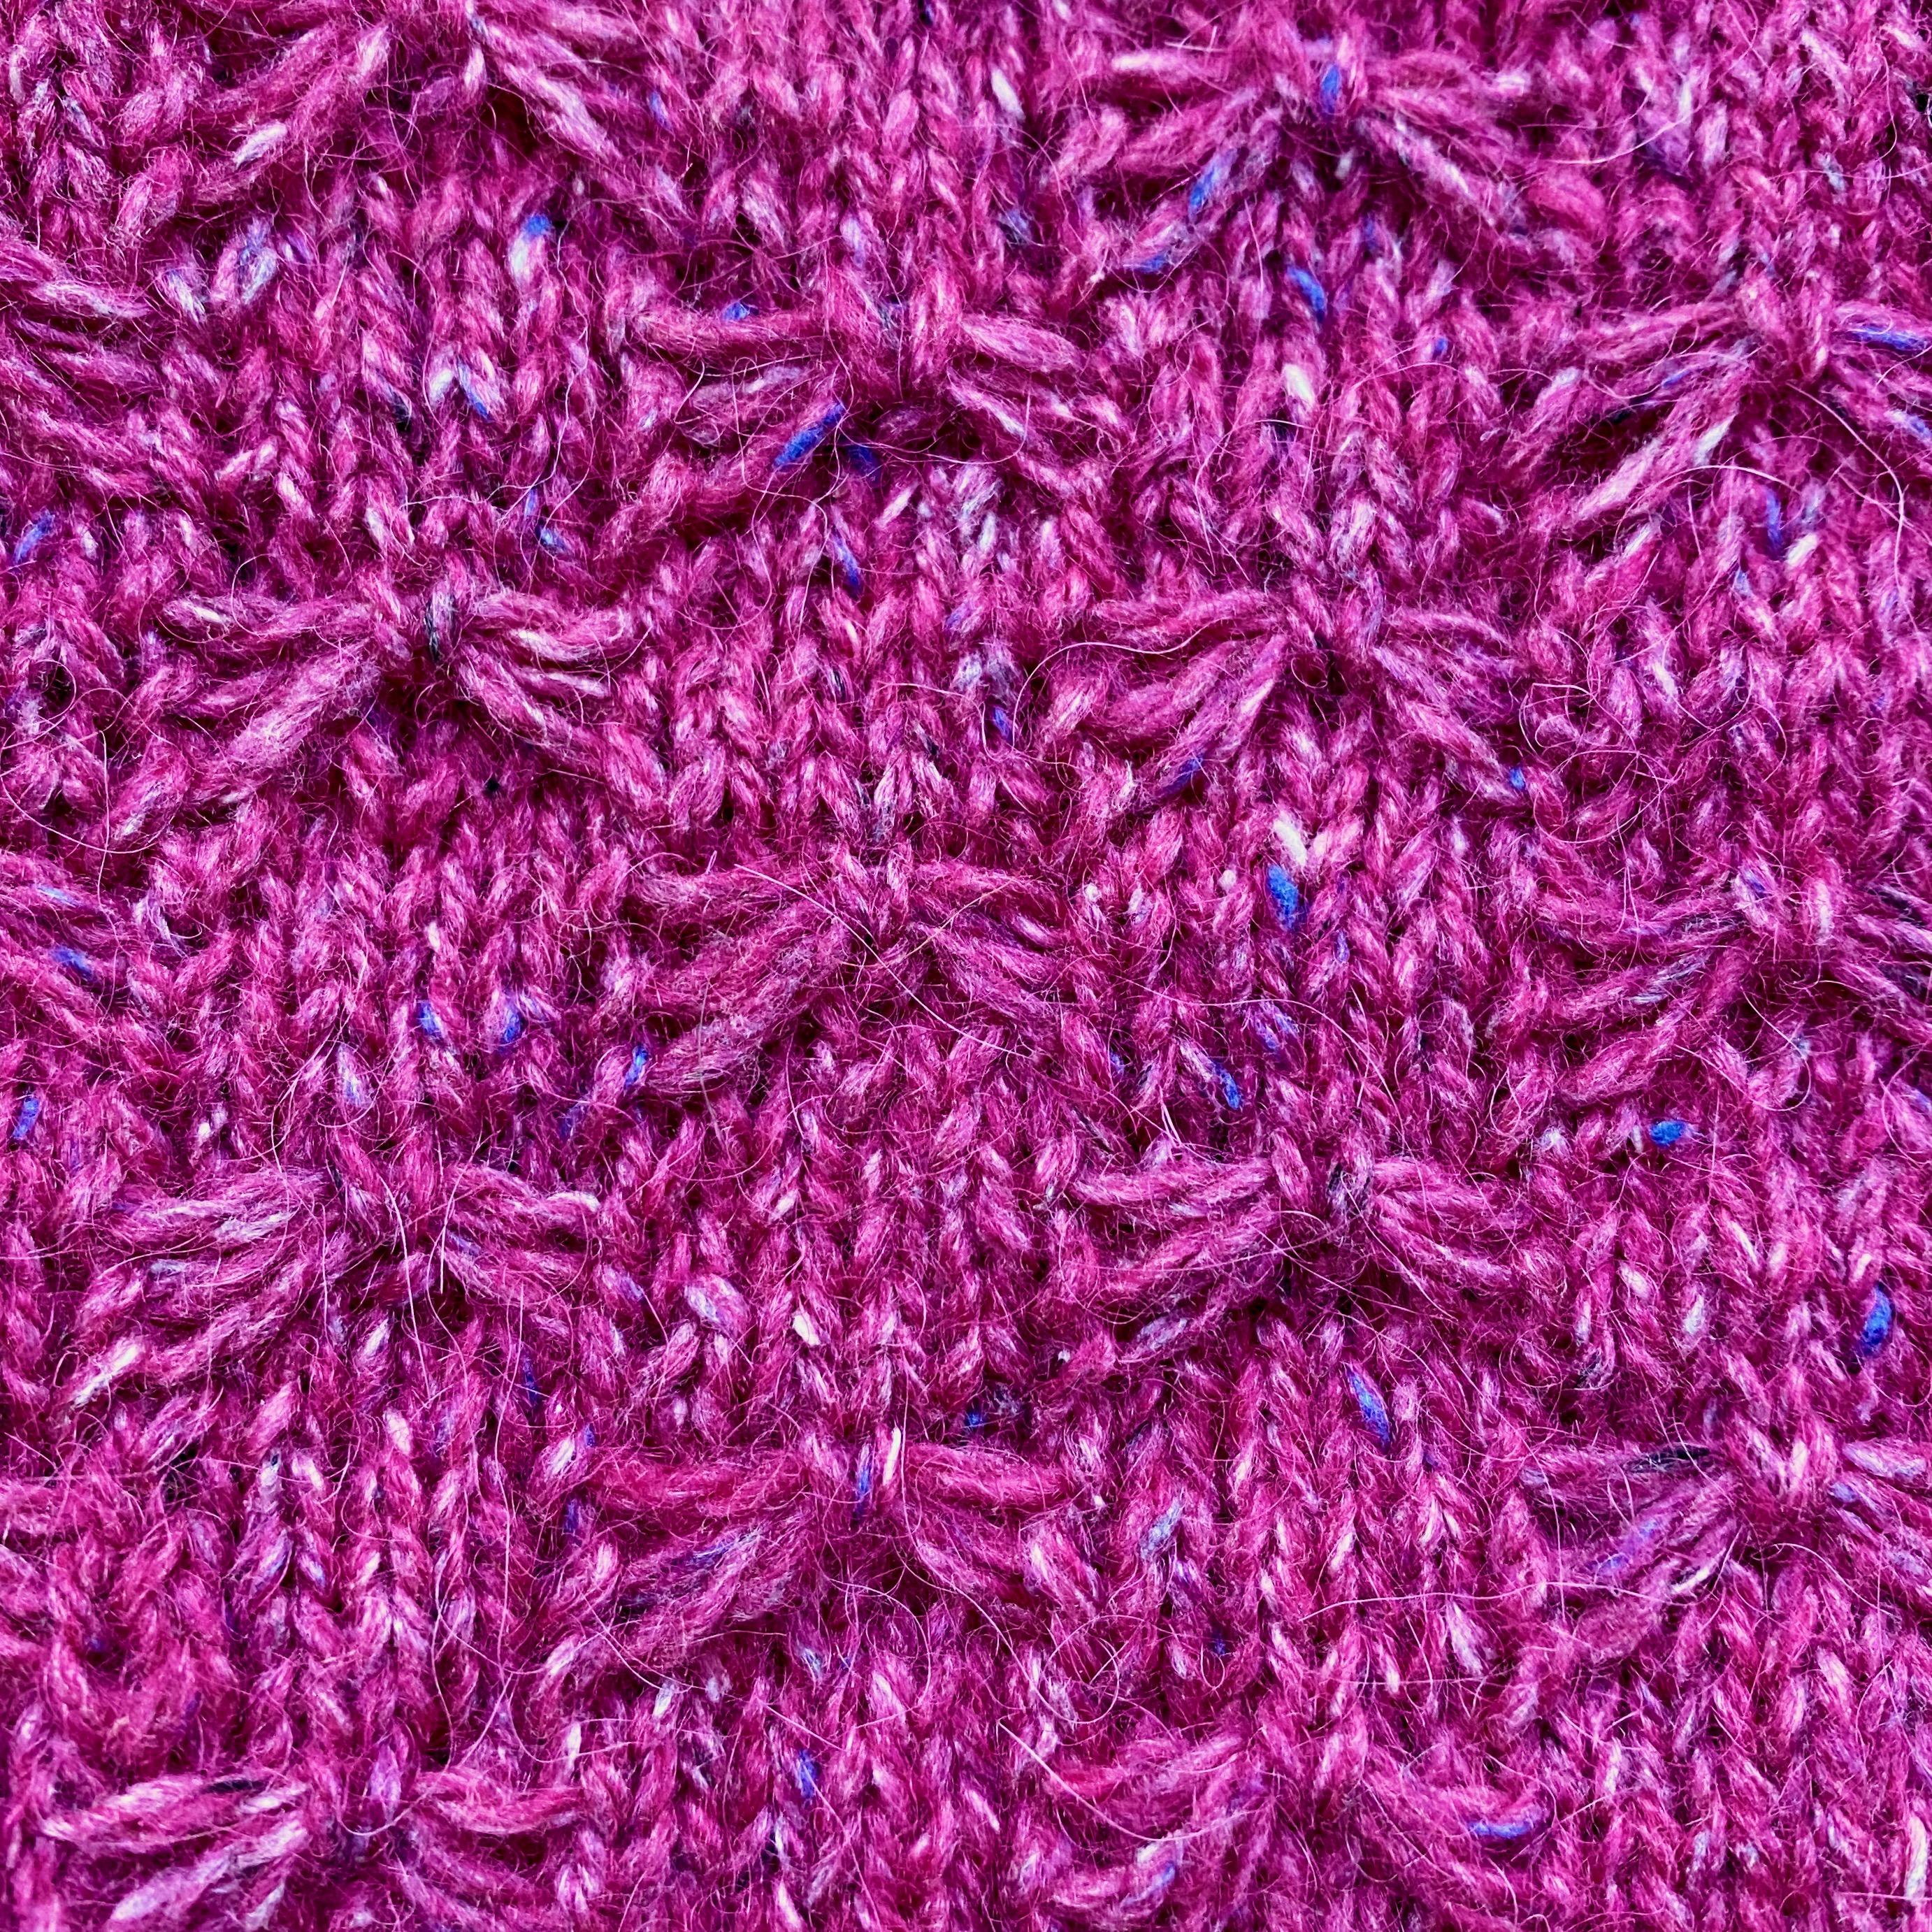 Close-up of butterfly stitch knitted with pink yarn - slipped stitches caught in the middle with holding stitch